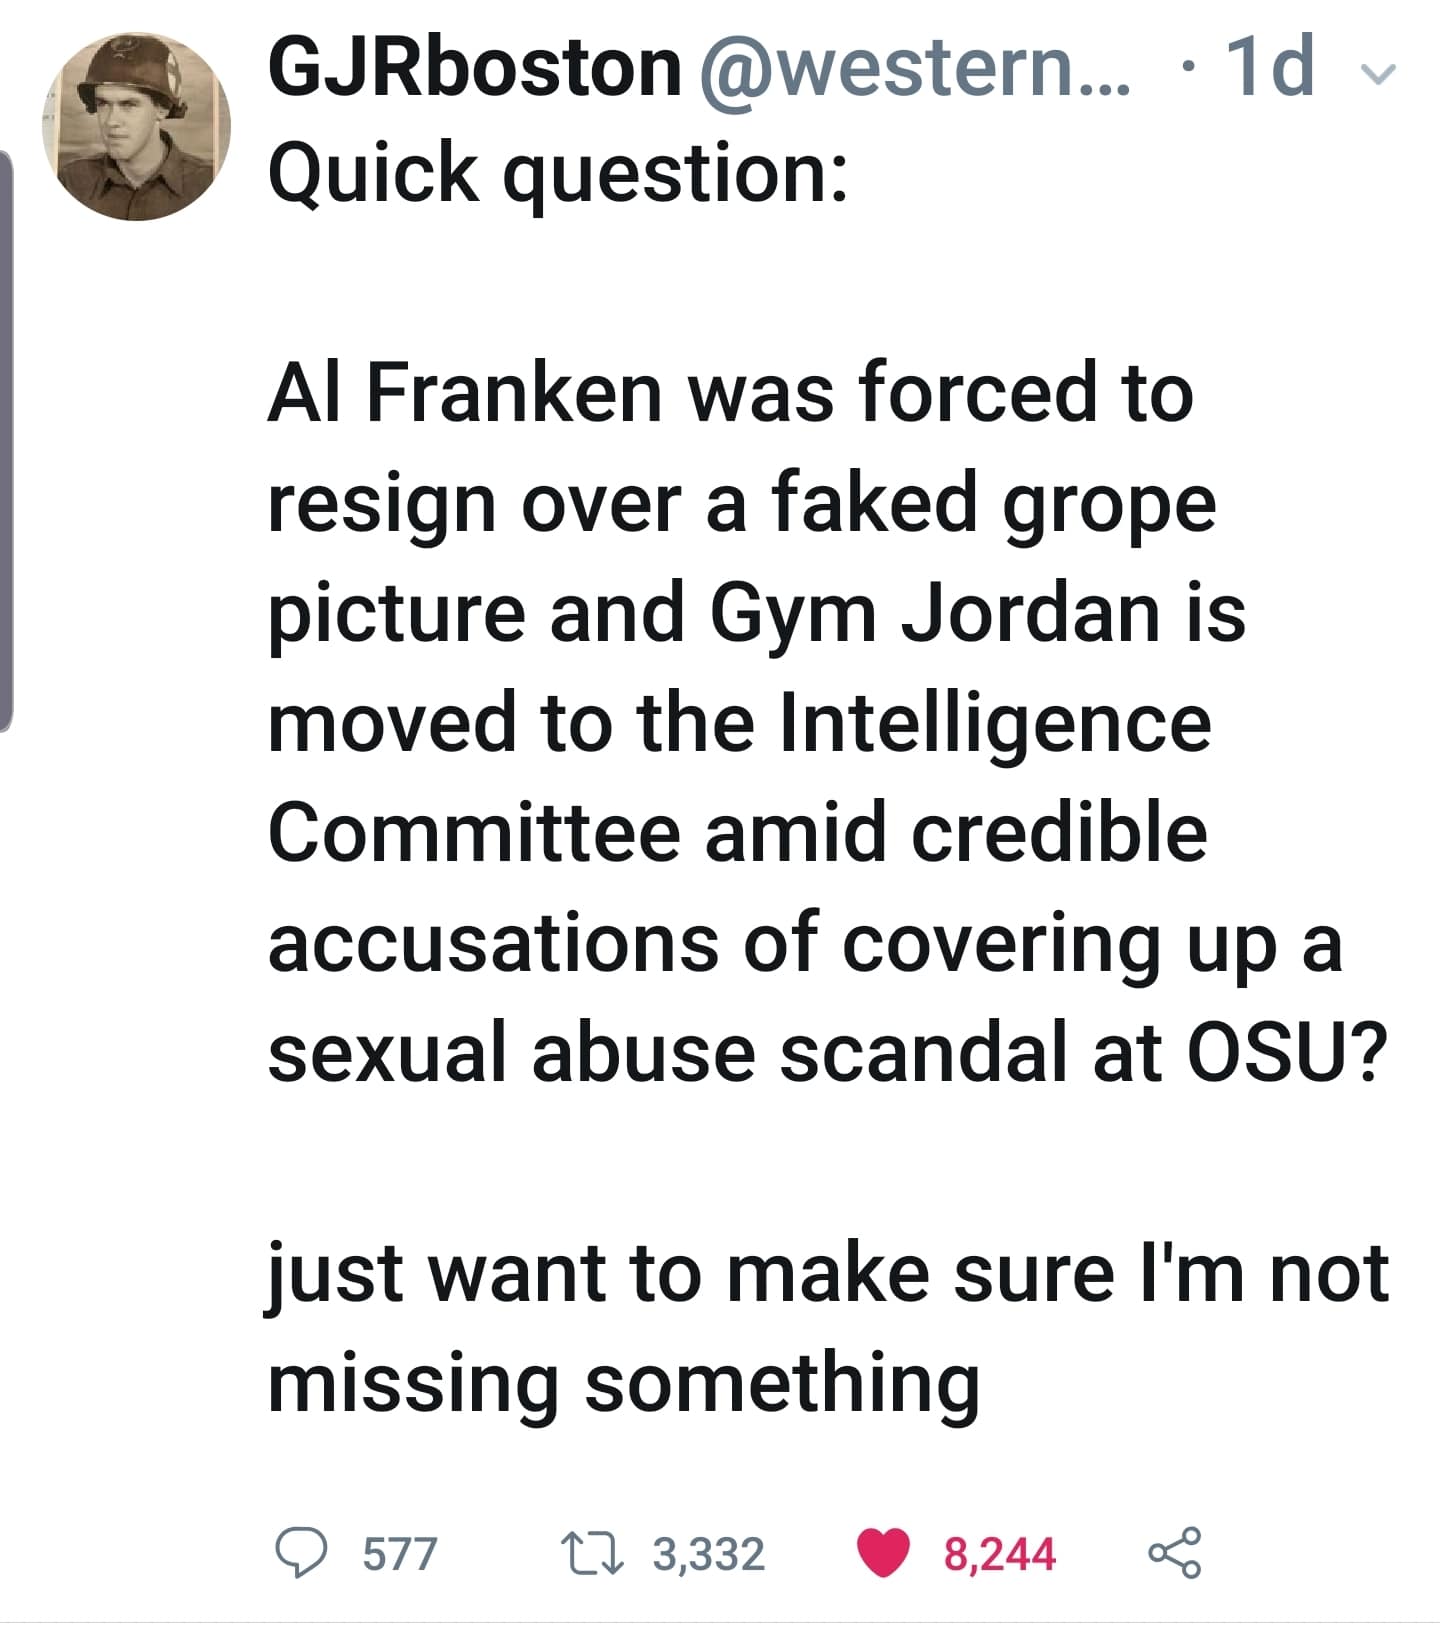 political political-memes political text: GJRboston @western... • Quick question: Al Franken was forced to resign over a faked grope picture and Gym Jordan is moved to the Intelligence Committee amid credible accusations of covering up a sexual abuse scandal at OSU? just want to make sure 11m not missing something 0 577 3,332 8,244 < 